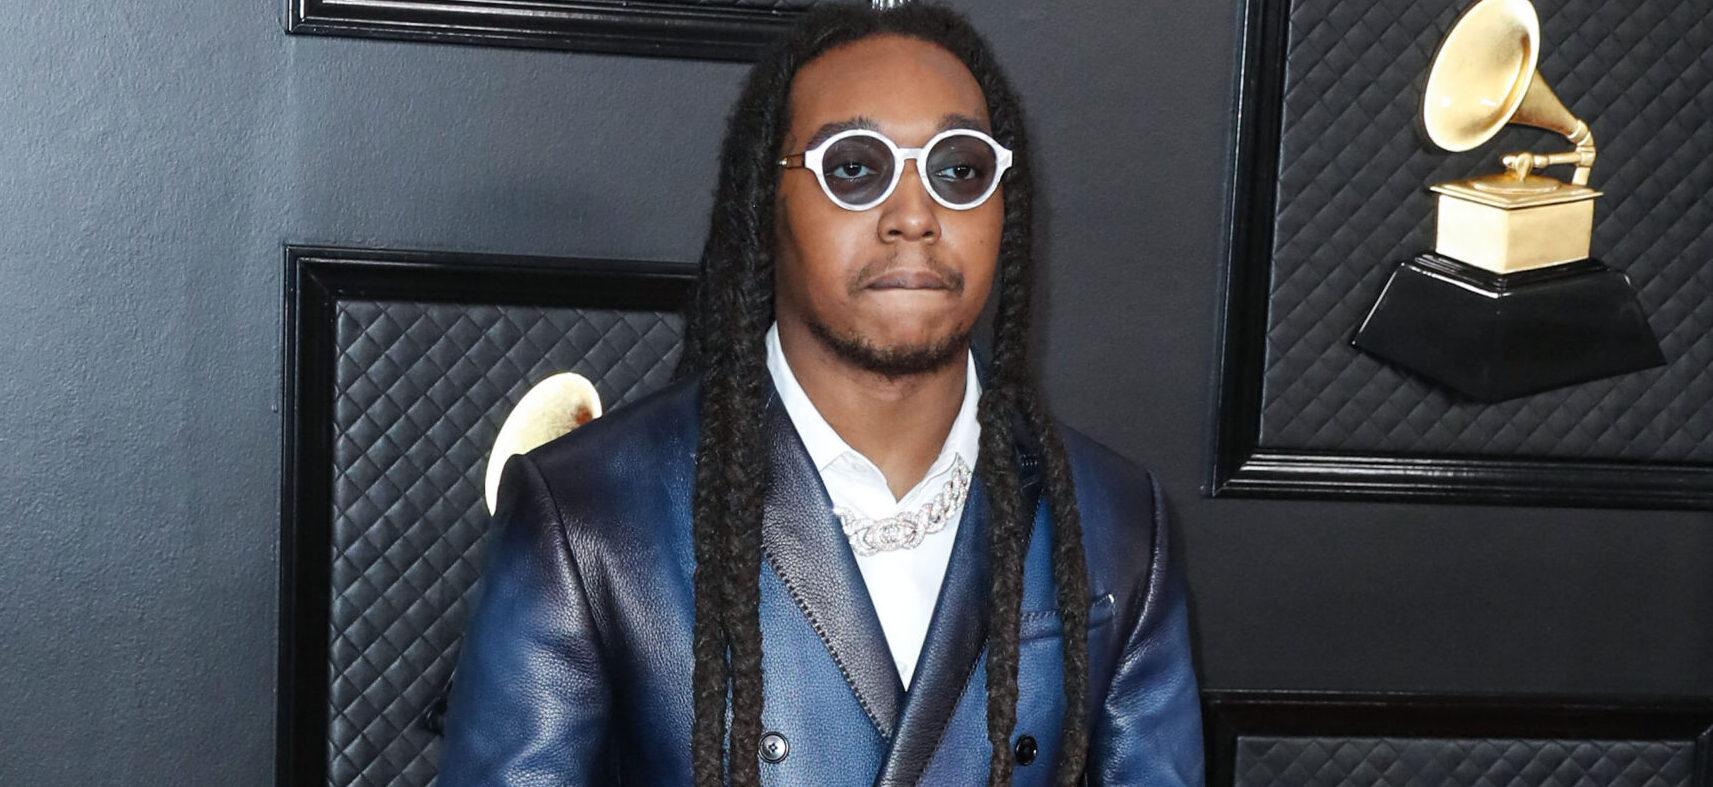 Takeoff’s Alleged Killer Has Been Officially Charged With Murder